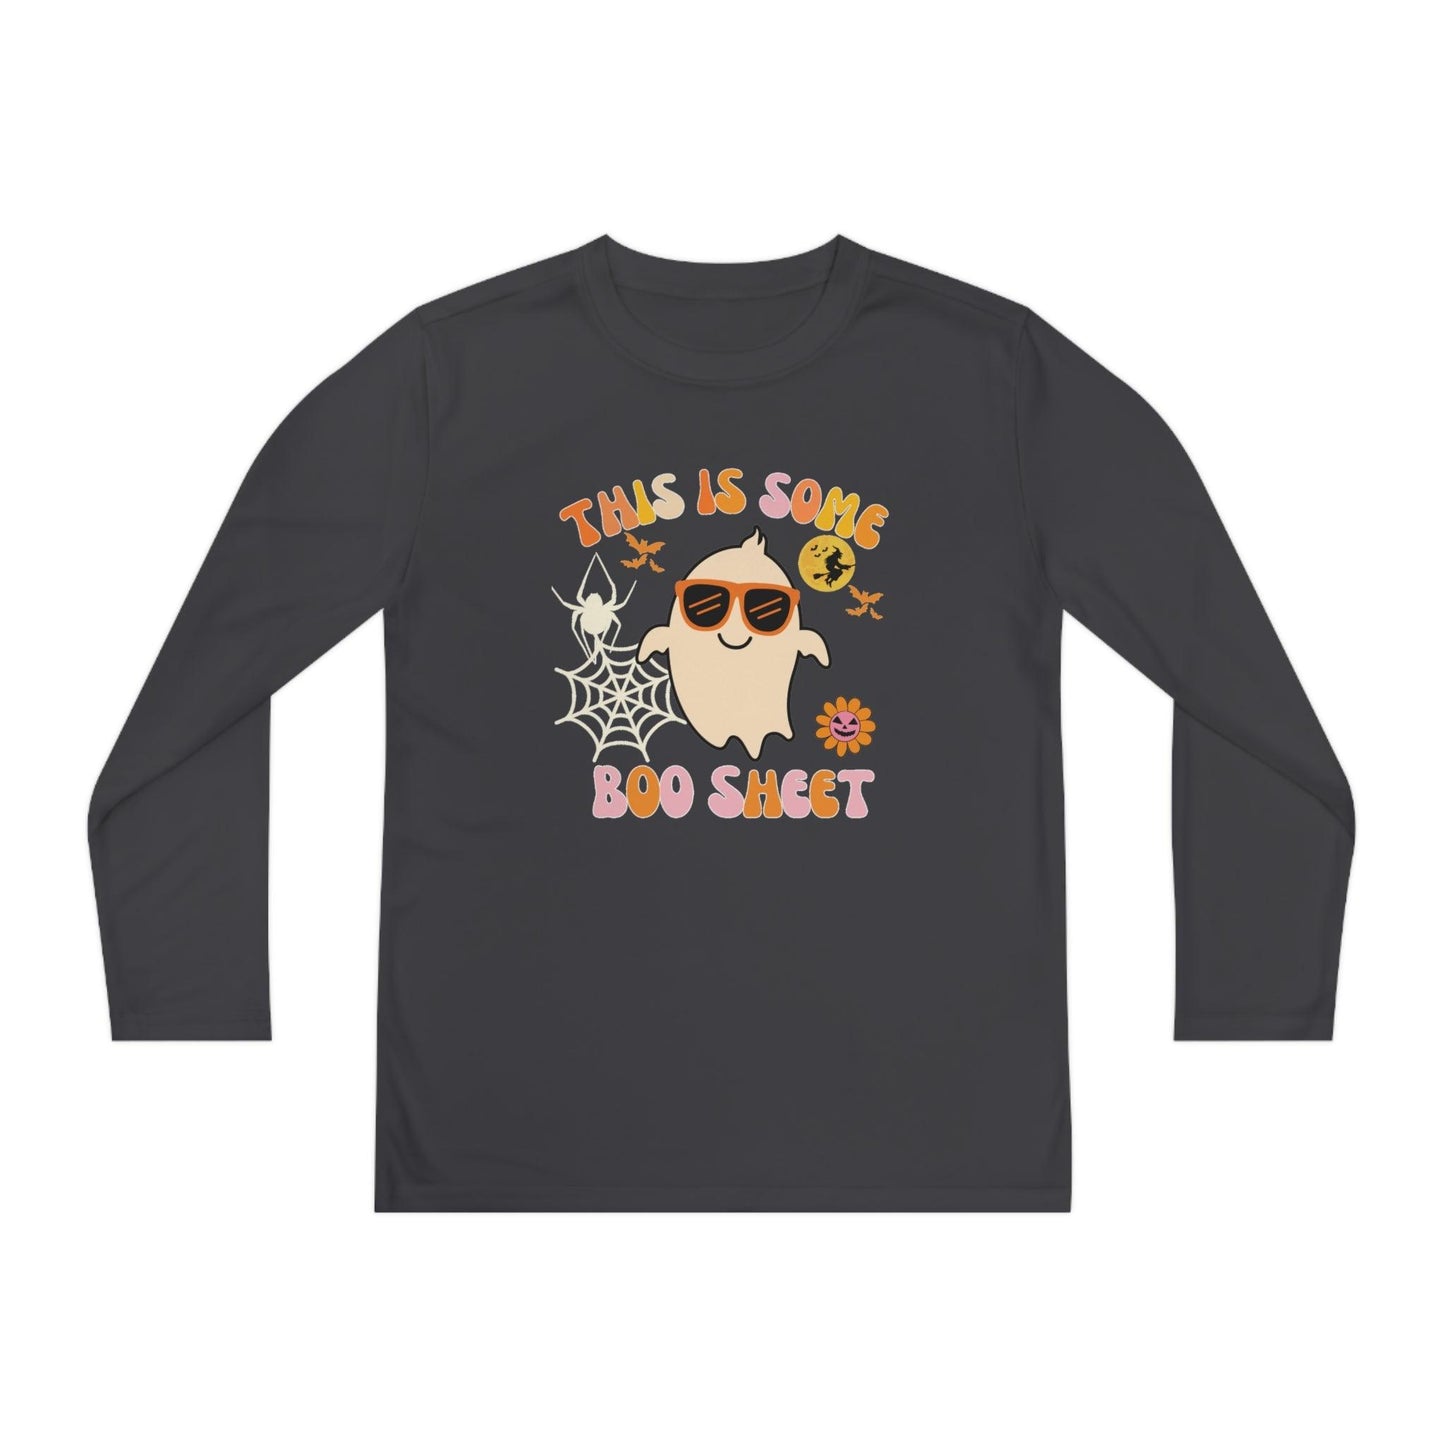 This is Some Boo Sheet Youth Halloween Costume Long Sleeve Competitor Tee Boo Sheet Halloween Shirt - Giftsmojo